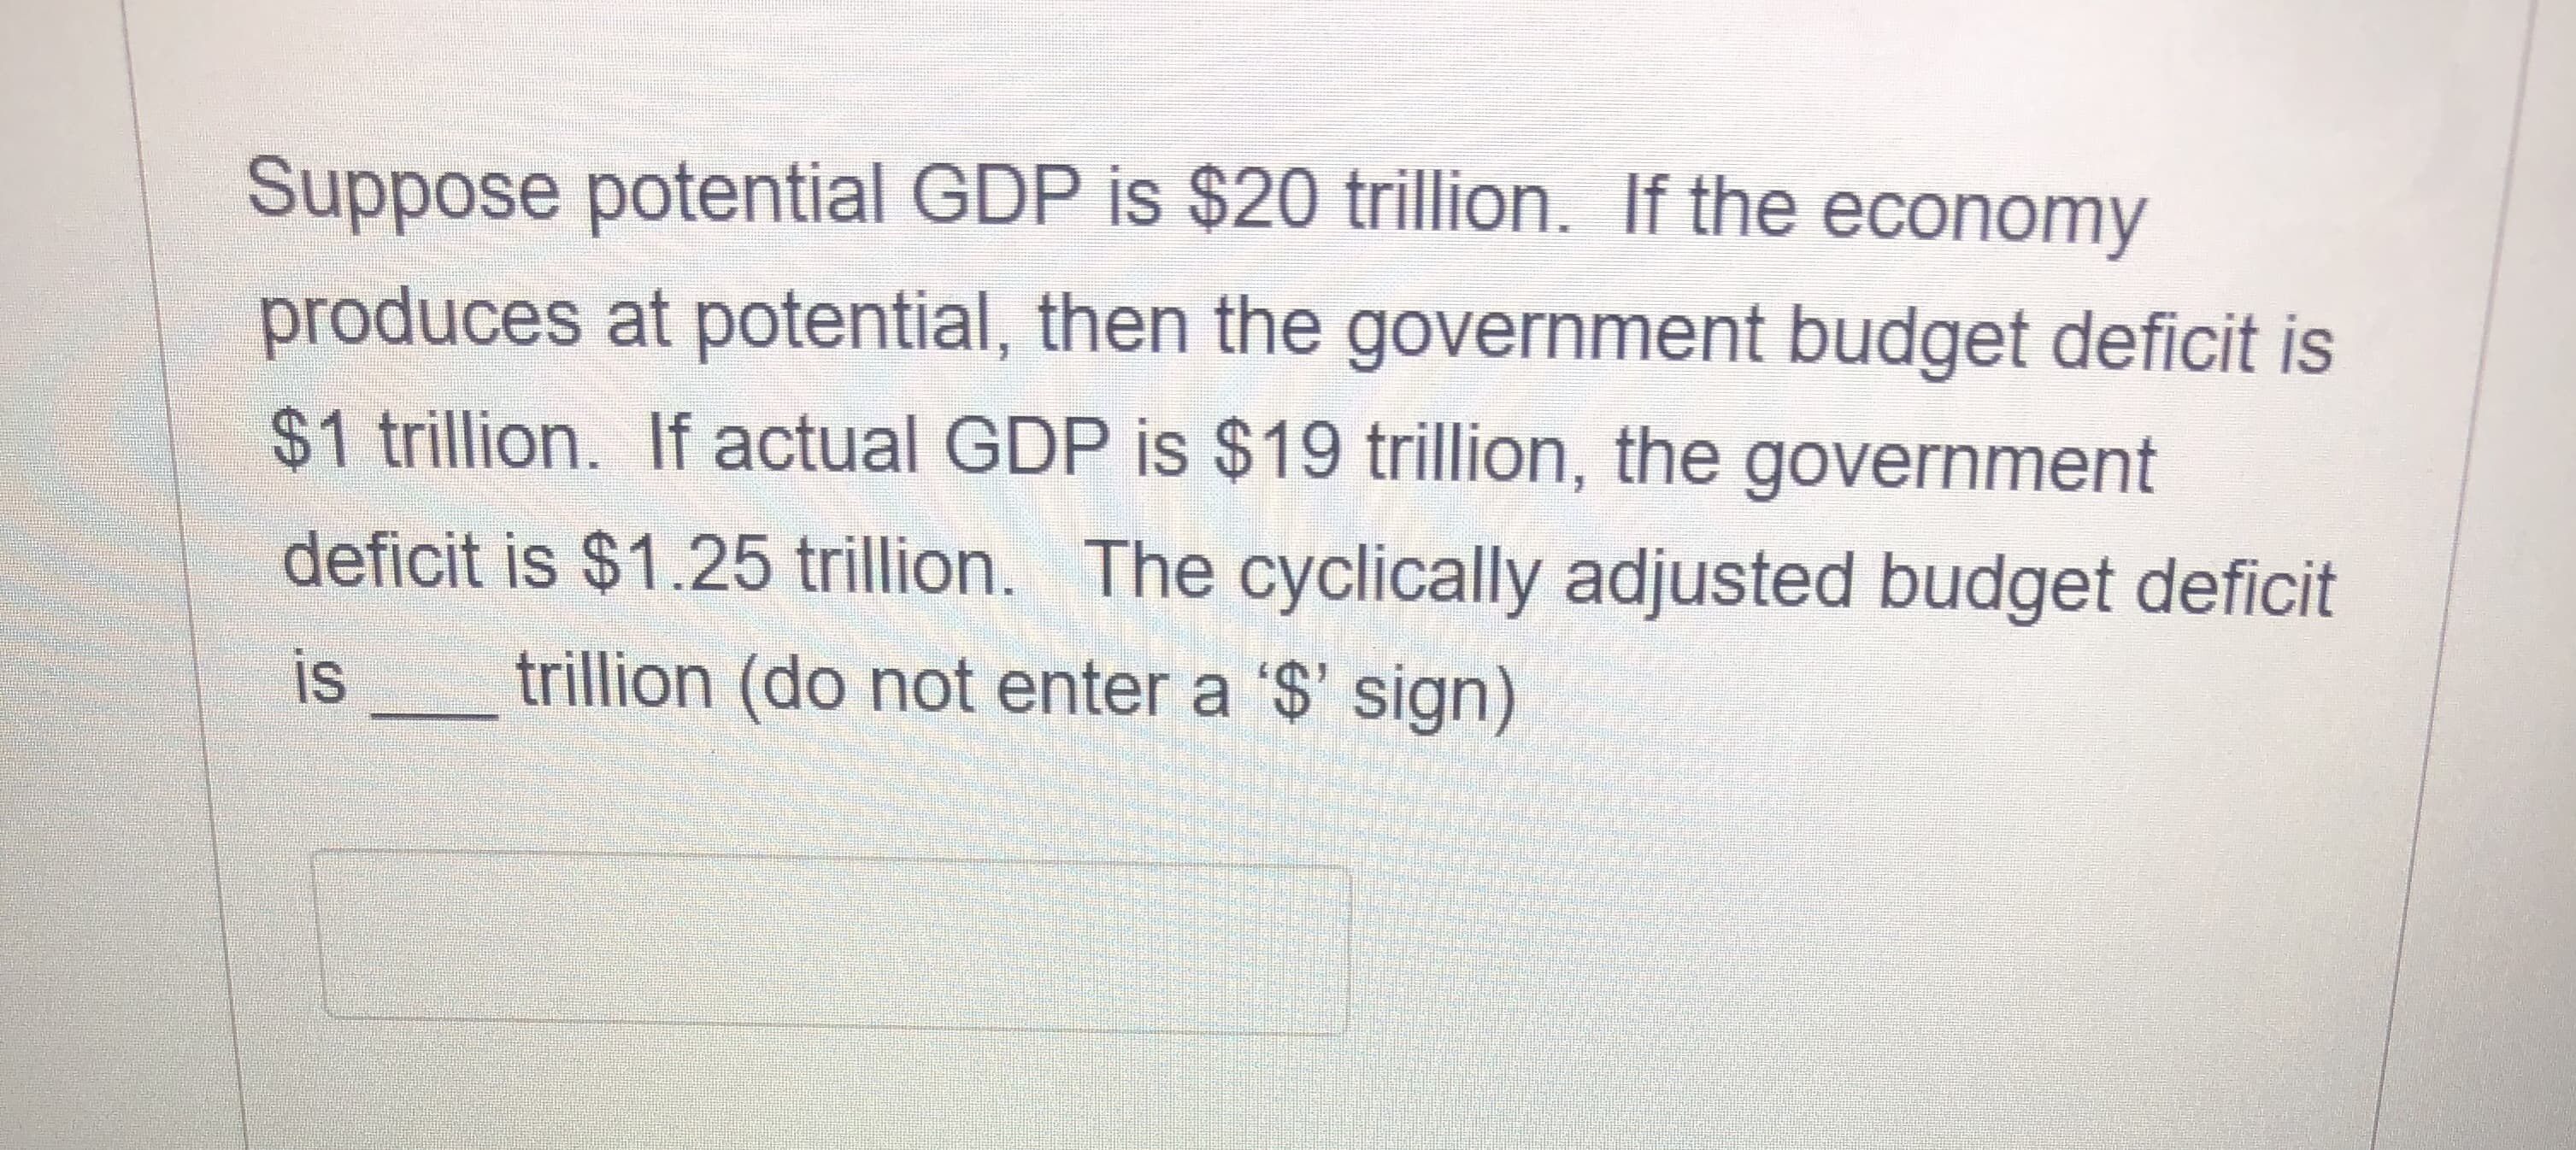 Suppose potential GDP is $20 trillion. If the economy
produces at potential, then the government budget deficit is
$1 trillion. If actual GDP is $19 trillion, the government
deficit is $1.25 trillion. The cyclically adjusted budget deficit
is
trillion (do not enter a '$' sign)
